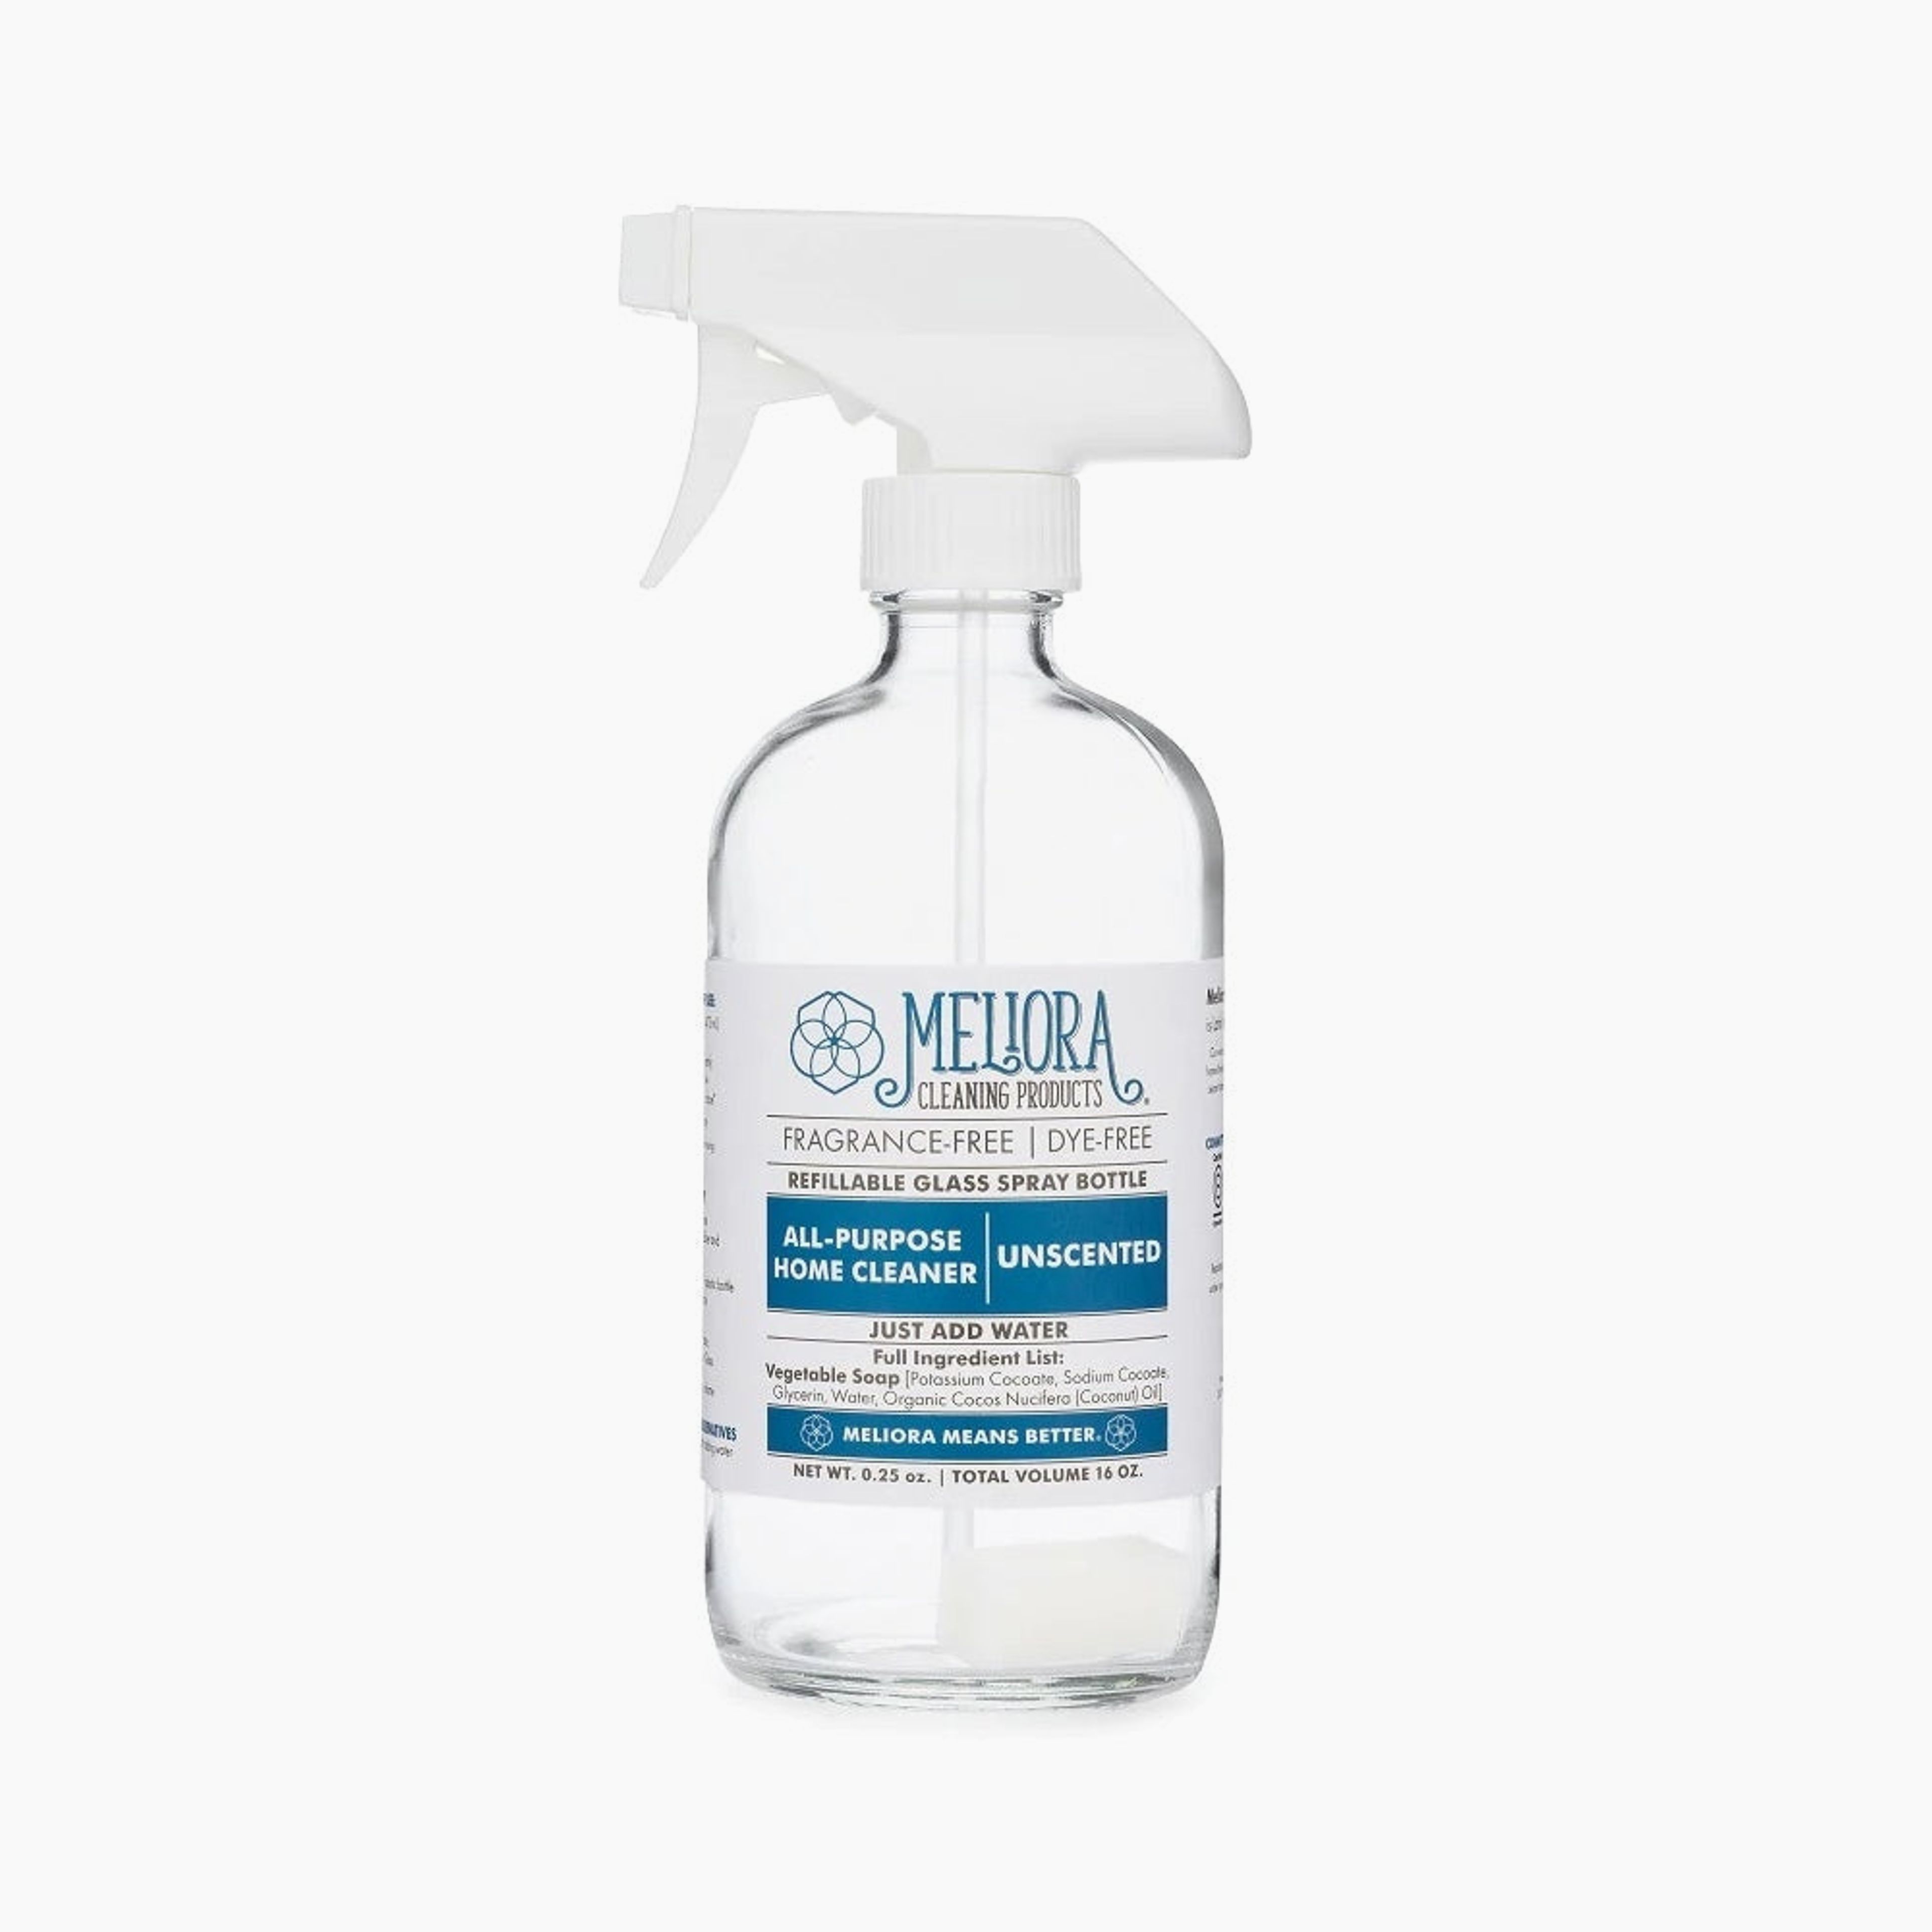 Meliora Cleaning Products: All-Purpose Home Cleaner